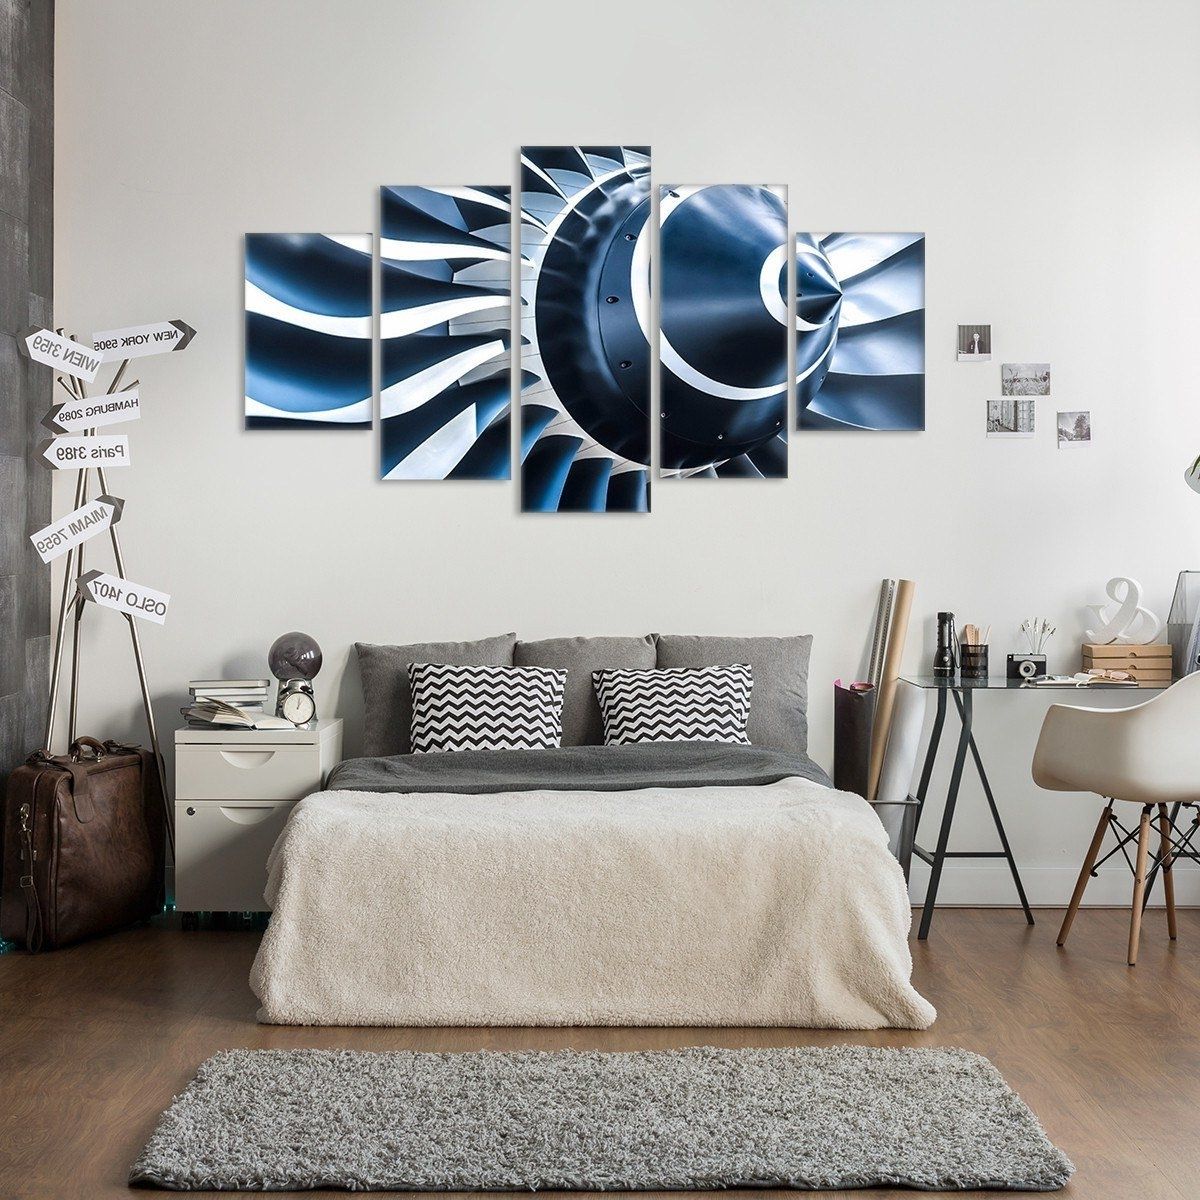 Popular Aviation Wall Art Bedroom : Andrews Living Arts – Cool Themed Within Aviation Wall Art (View 1 of 20)